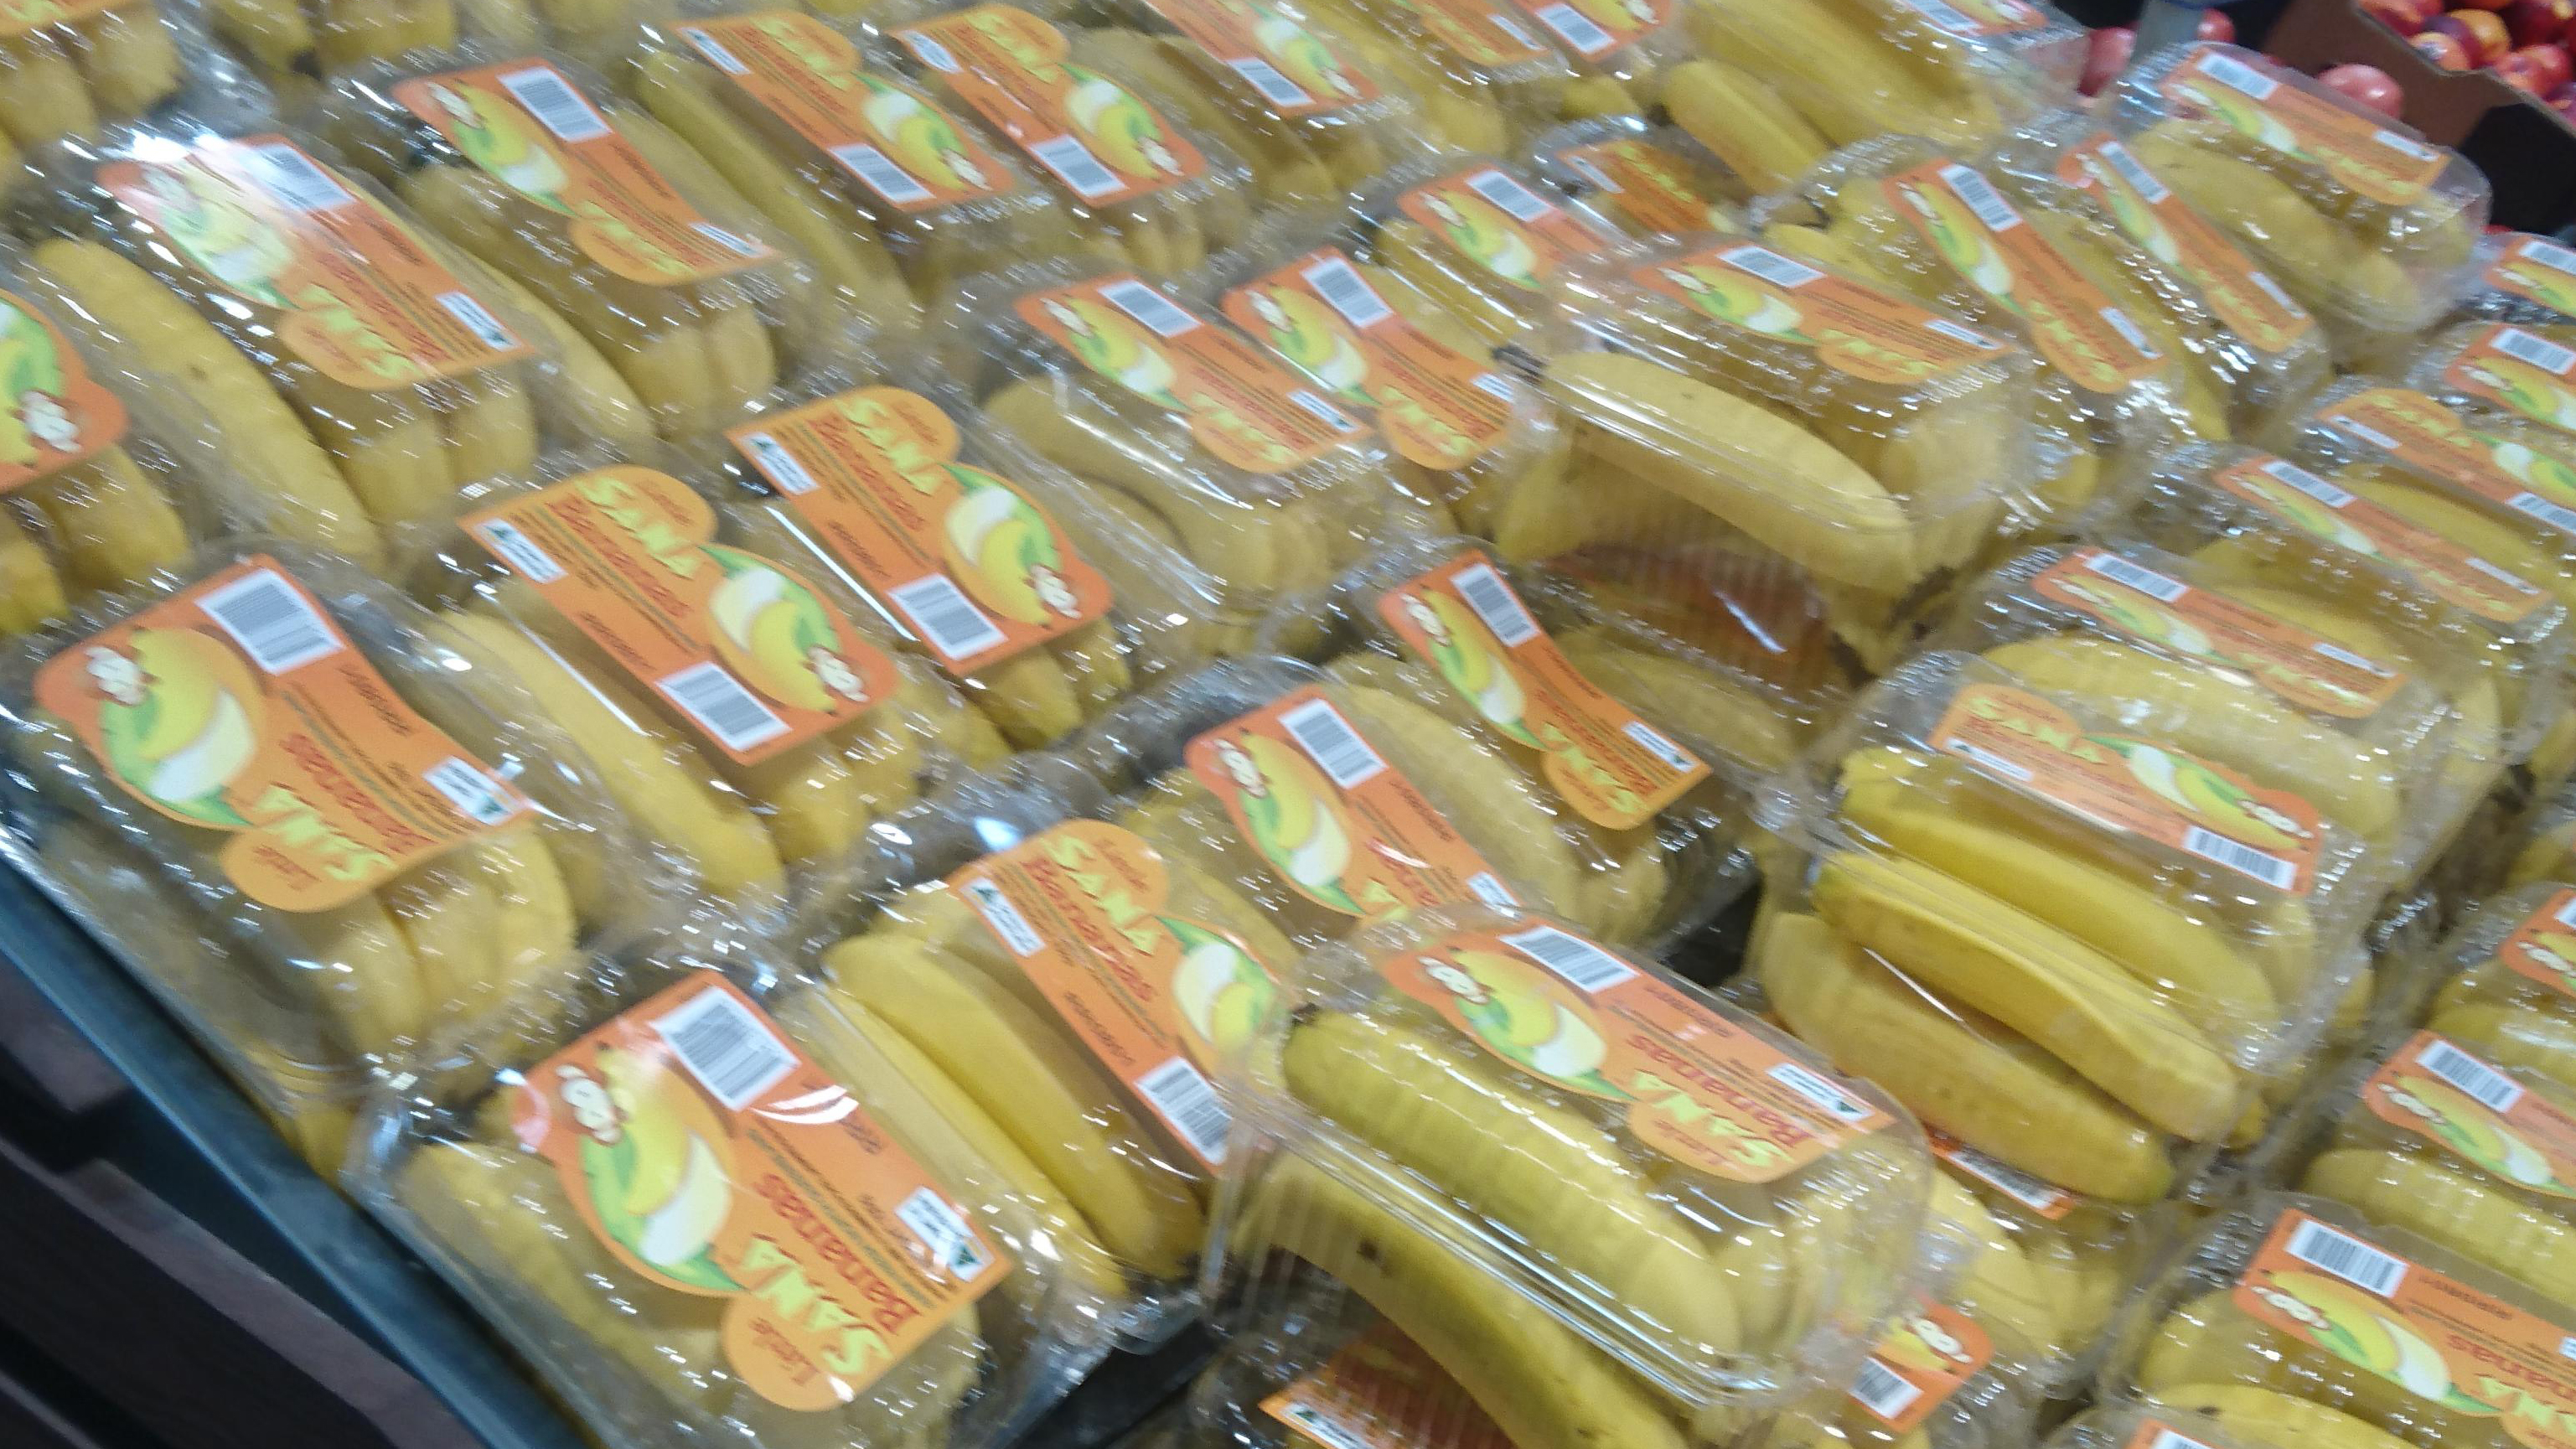 Woolworths plastic packaging: Photo of packed bananas sparks outrage3074 x 1729